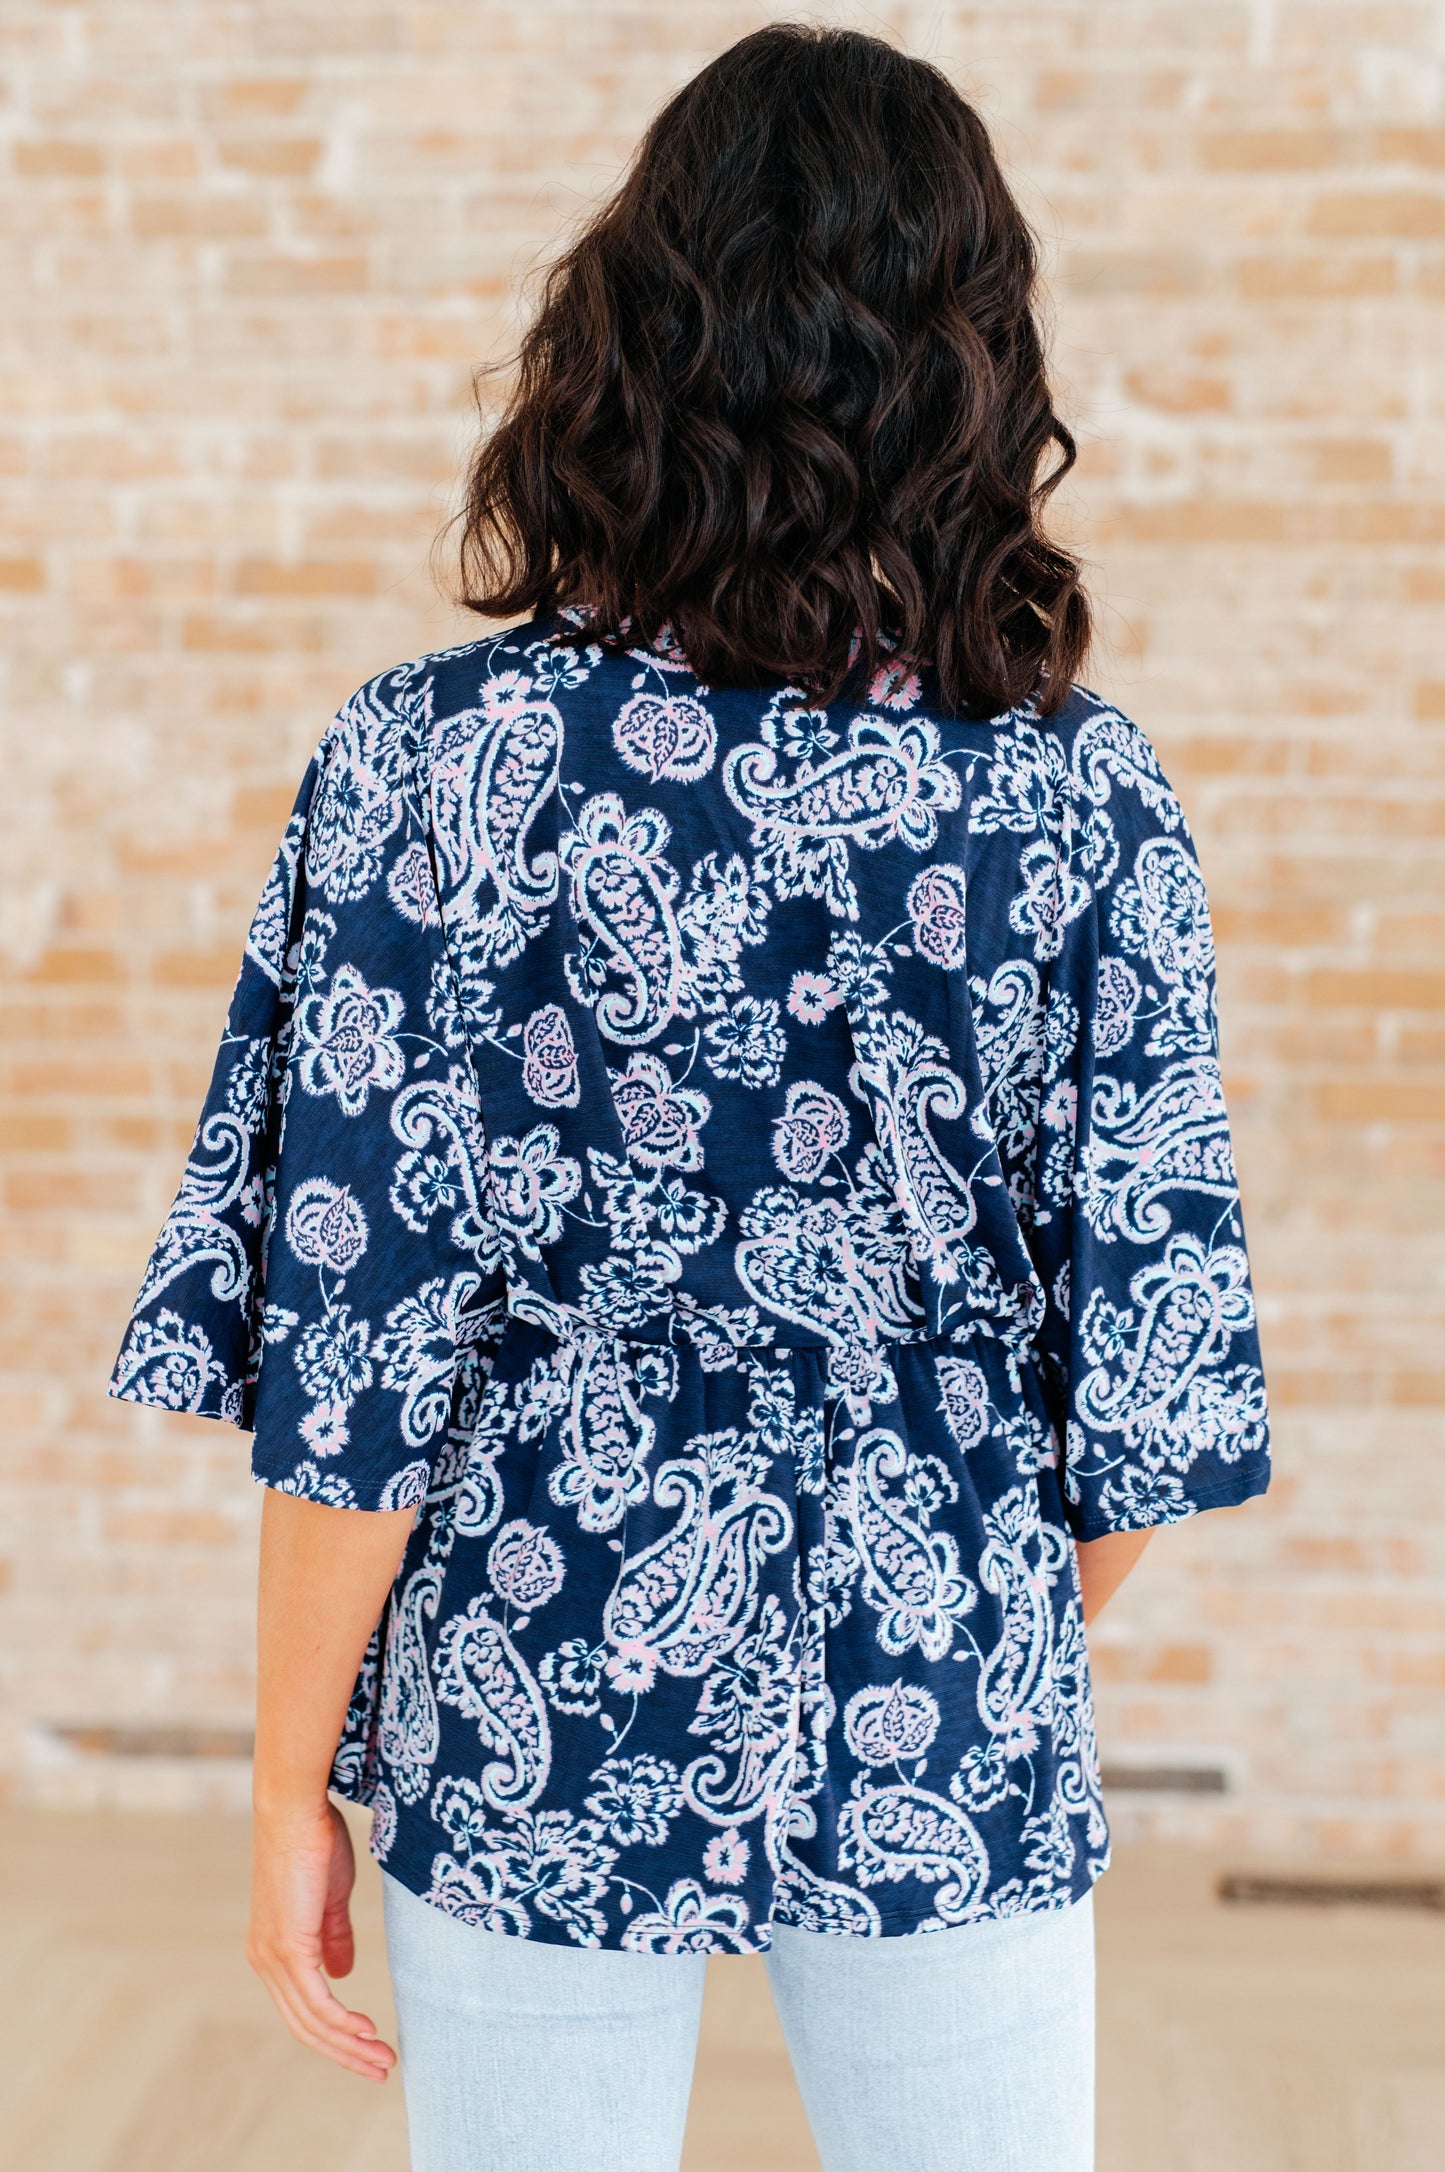 Dreamer Peplum Top in Navy and Pink Paisley - Southern Divas Boutique